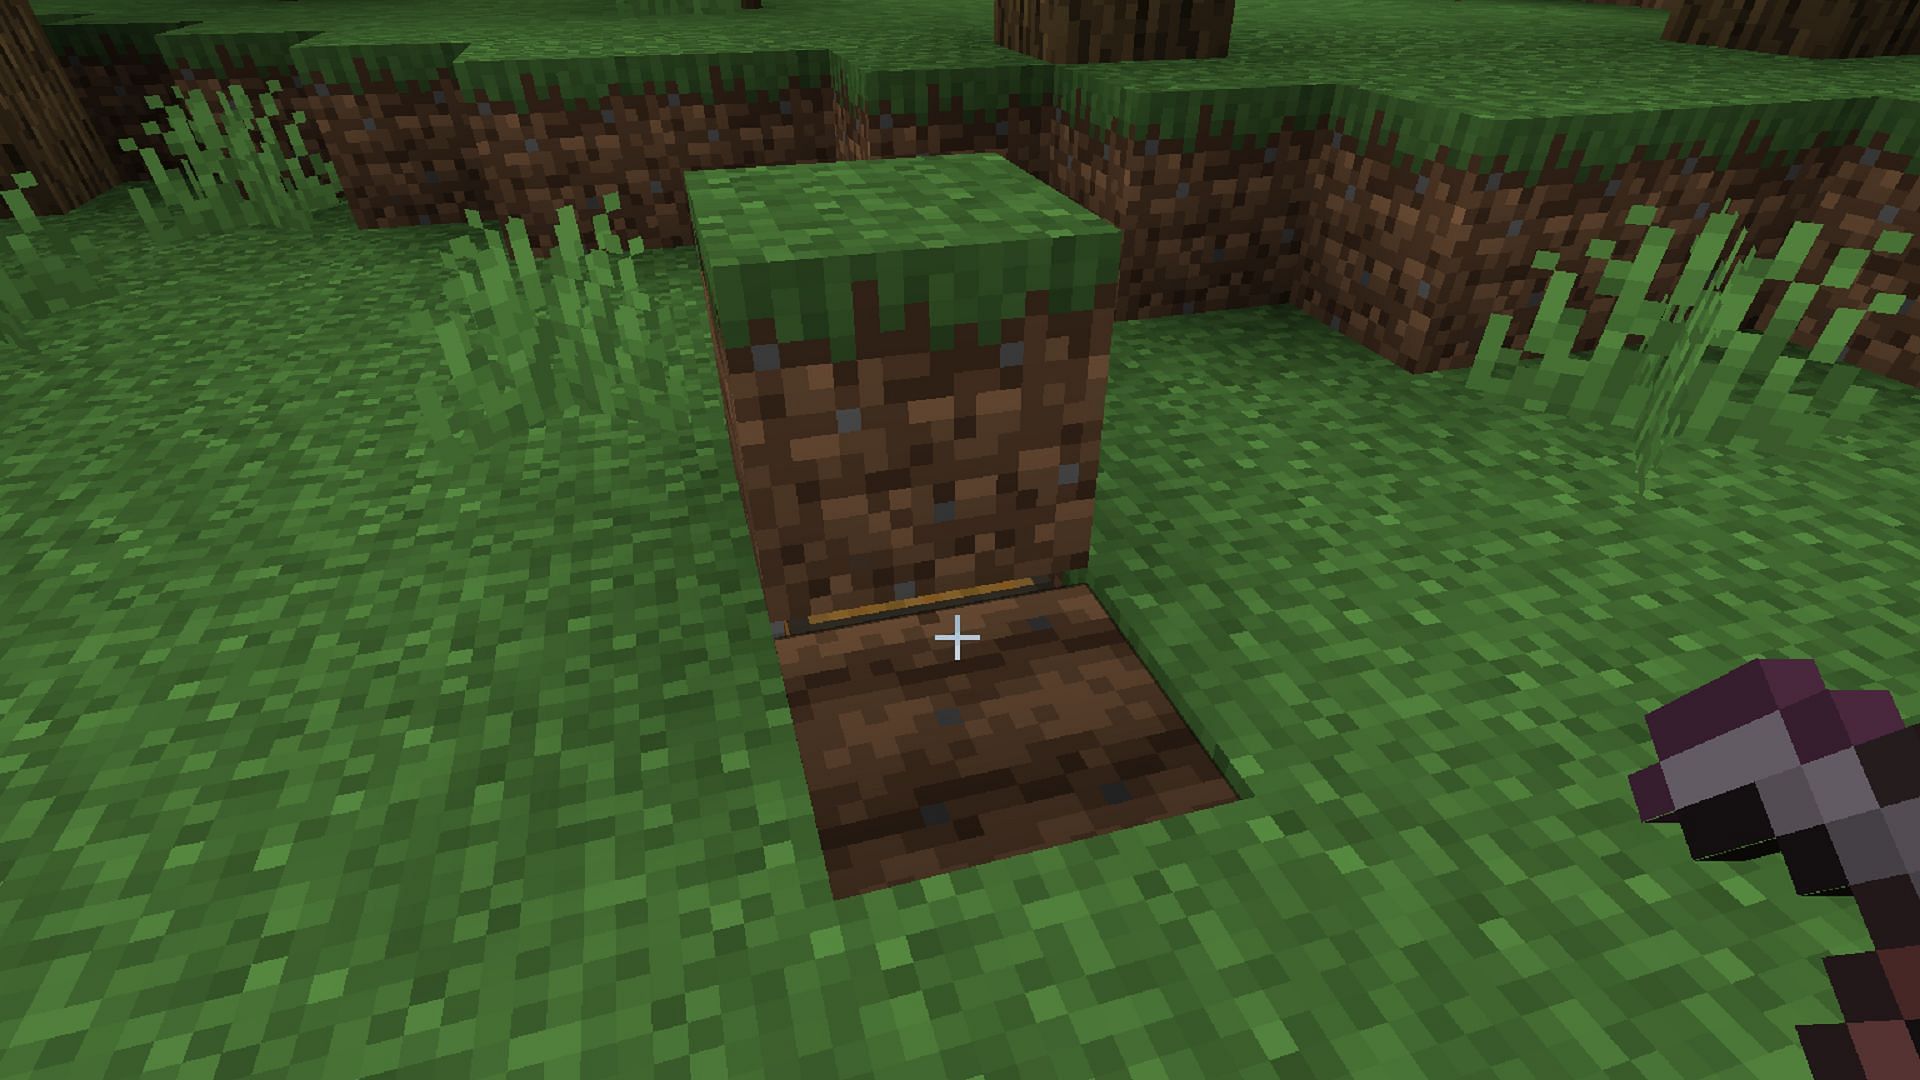 Farmland can reveal a small compartment where you can access a single chest of items (Image via Mojang)